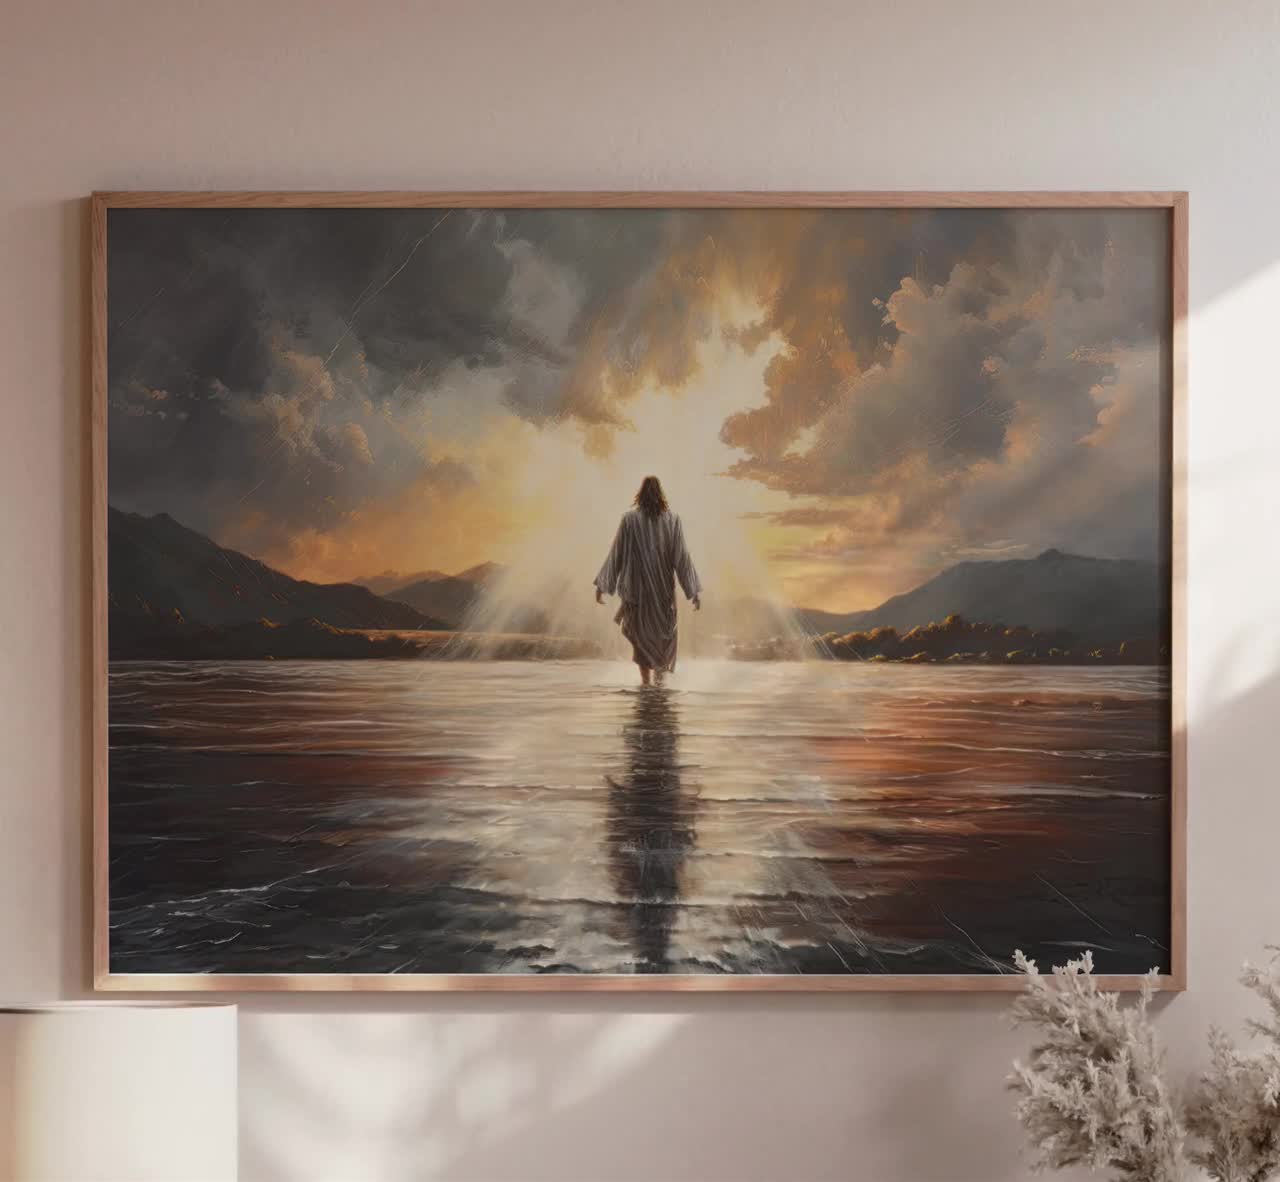 Jesus Christ Walking on Water Etsy Art, Original Religious Art Christian Print, Oil Decor, Painting, Wall Clouds - Religious Matte Wall Holy Print